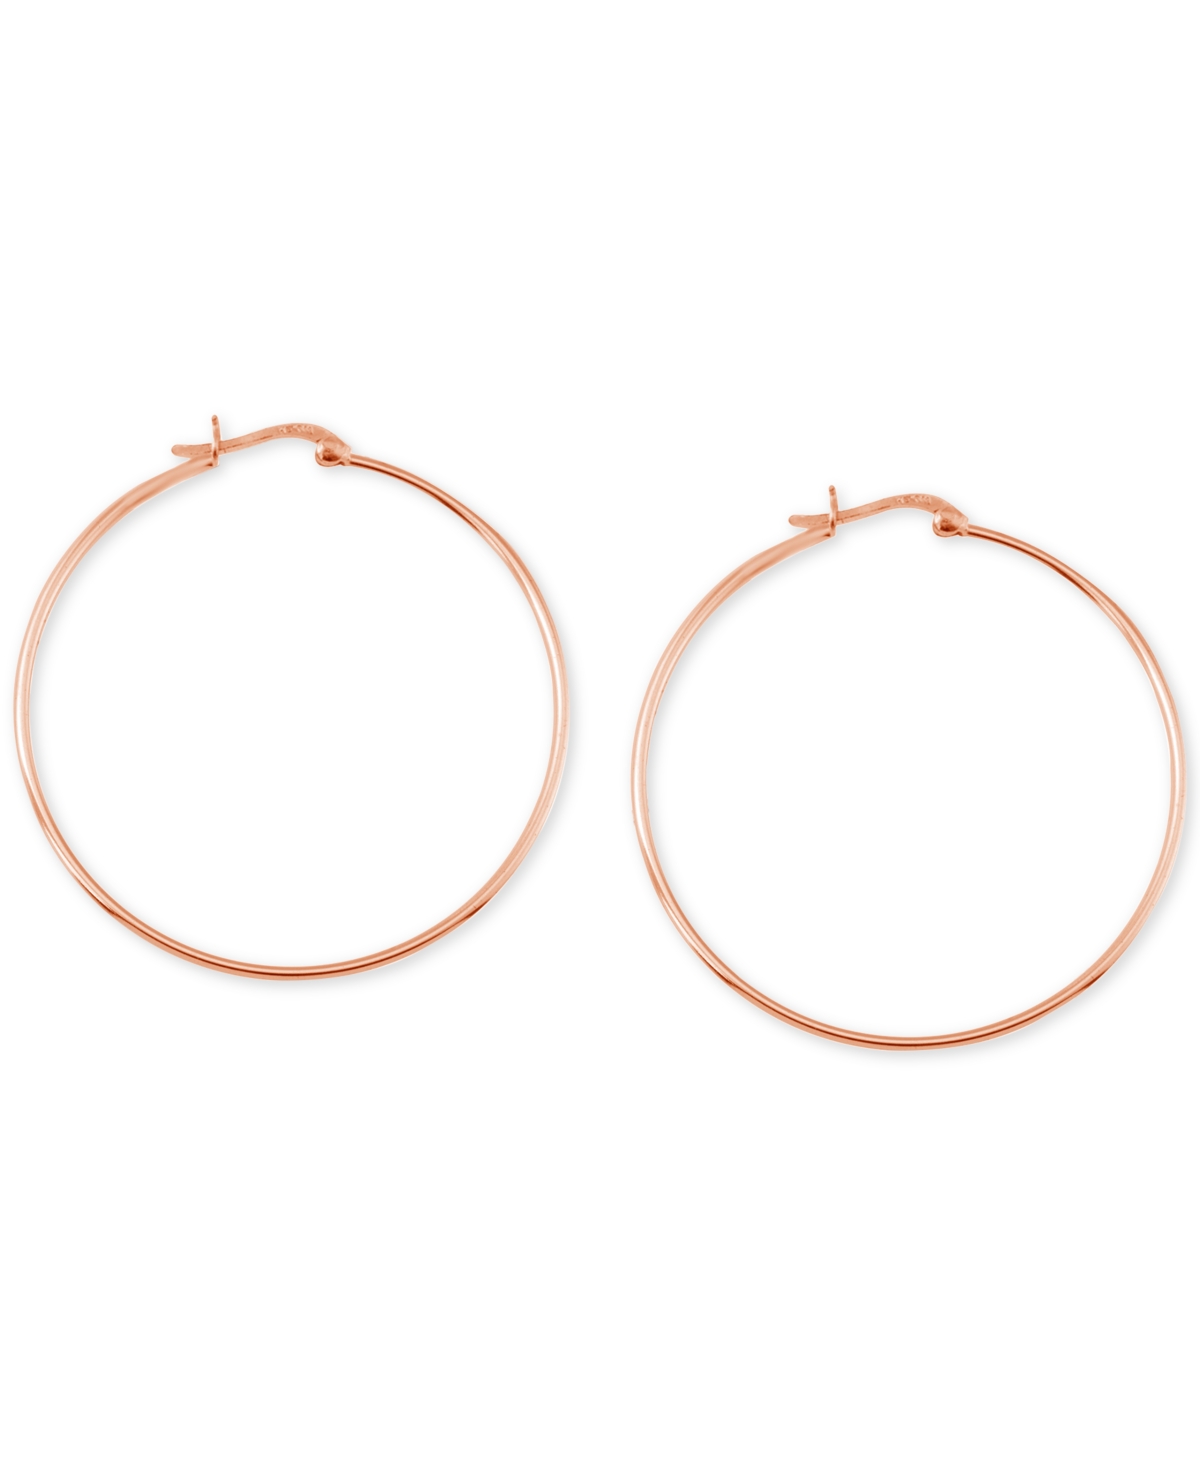 And Now This Large Skinny Hoop Earrings in Rose Gold-Plate - Rose Gold